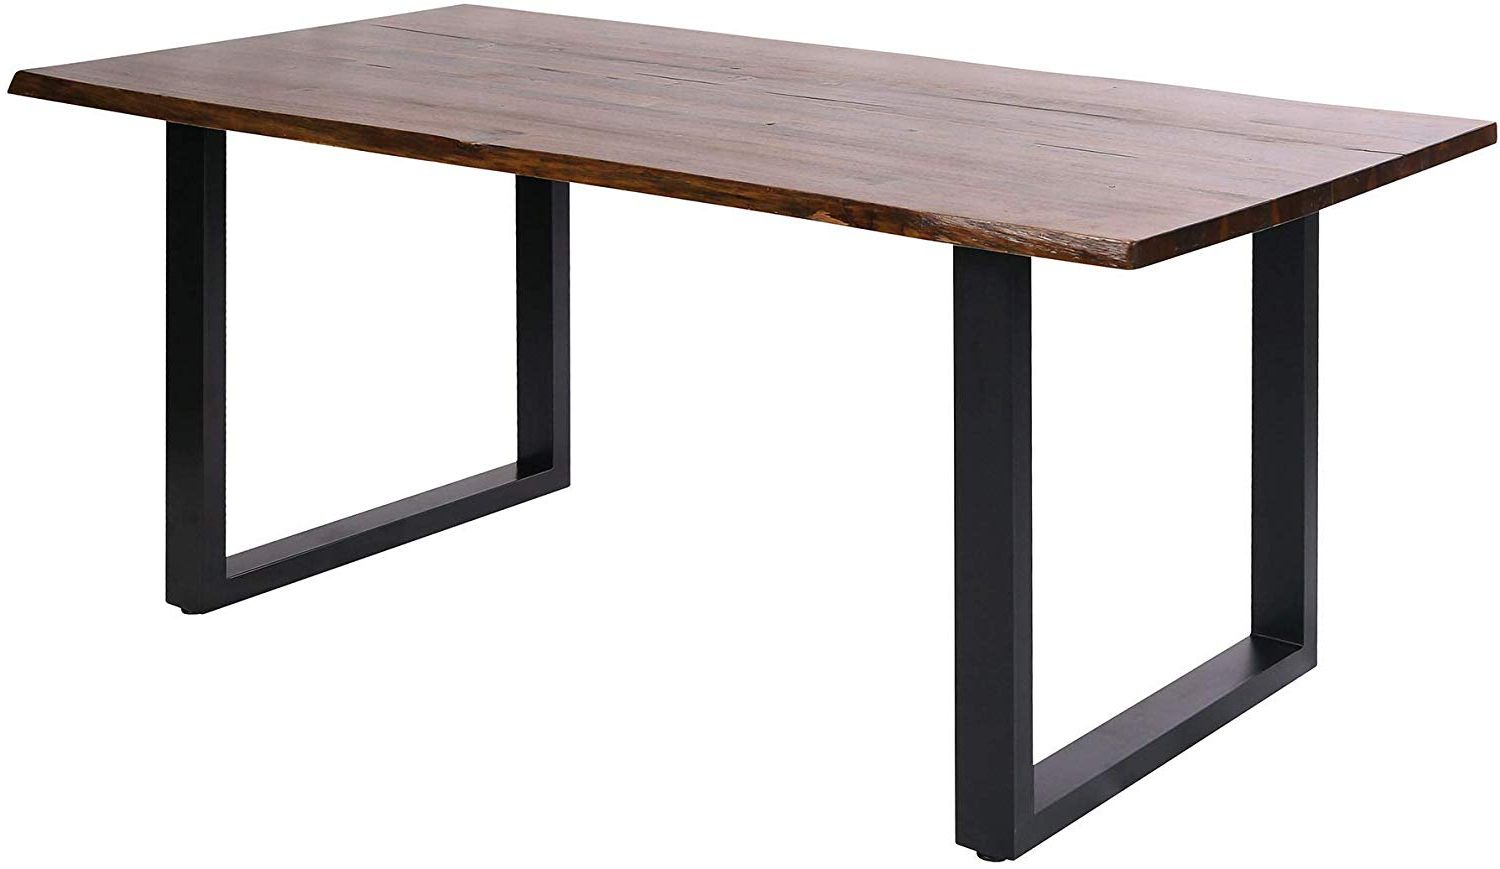 Fashionable Amazon: Living Edge Dining Table In Natural Stain And Inside Acacia Dining Tables With Black Legs (View 10 of 25)